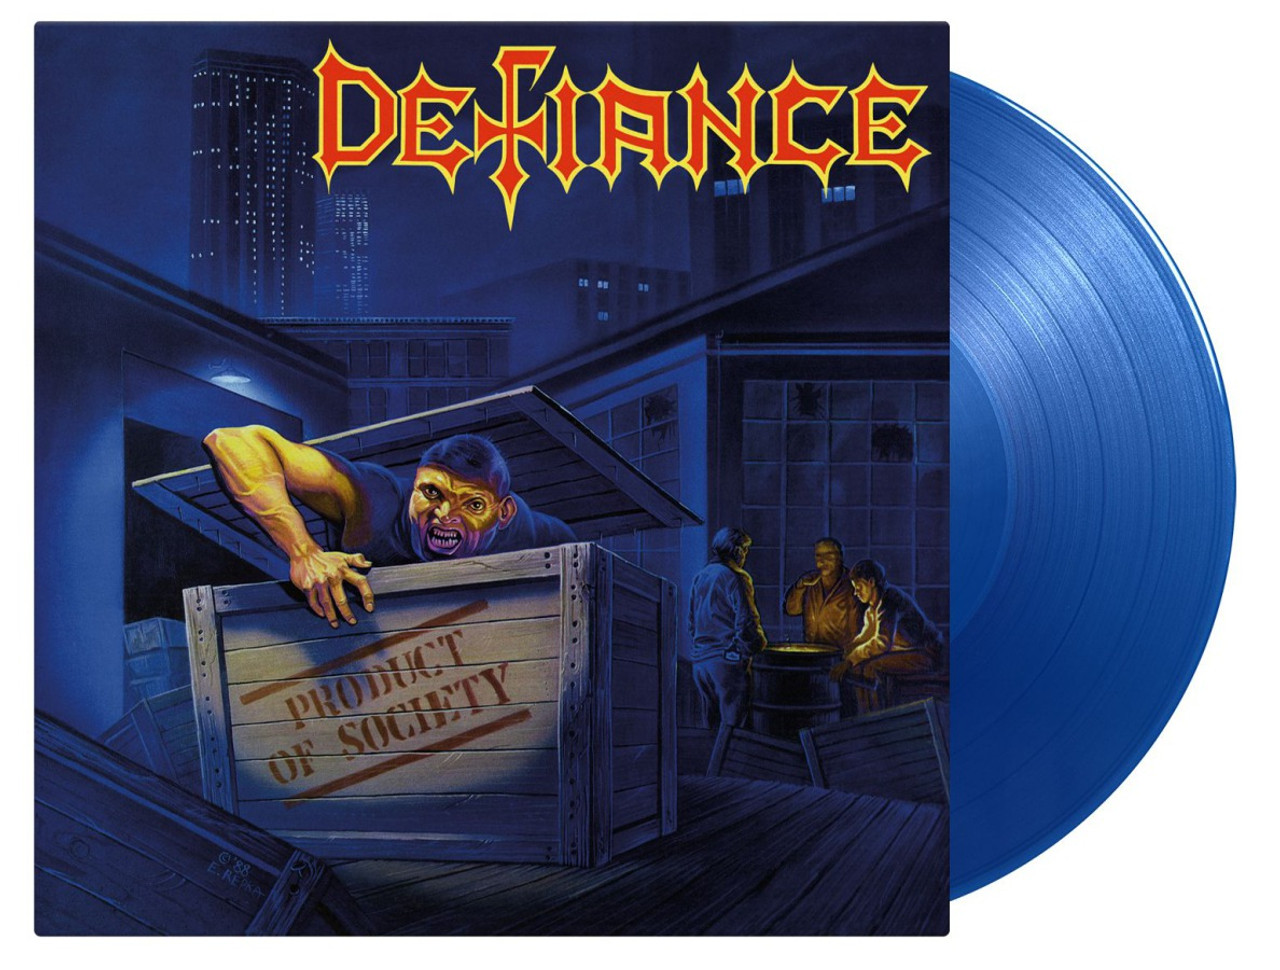 PRE-ORDER - Defiance 'Product of Society' LP 180g Blue Vinyl - RELEASE DATE 20th January 2023